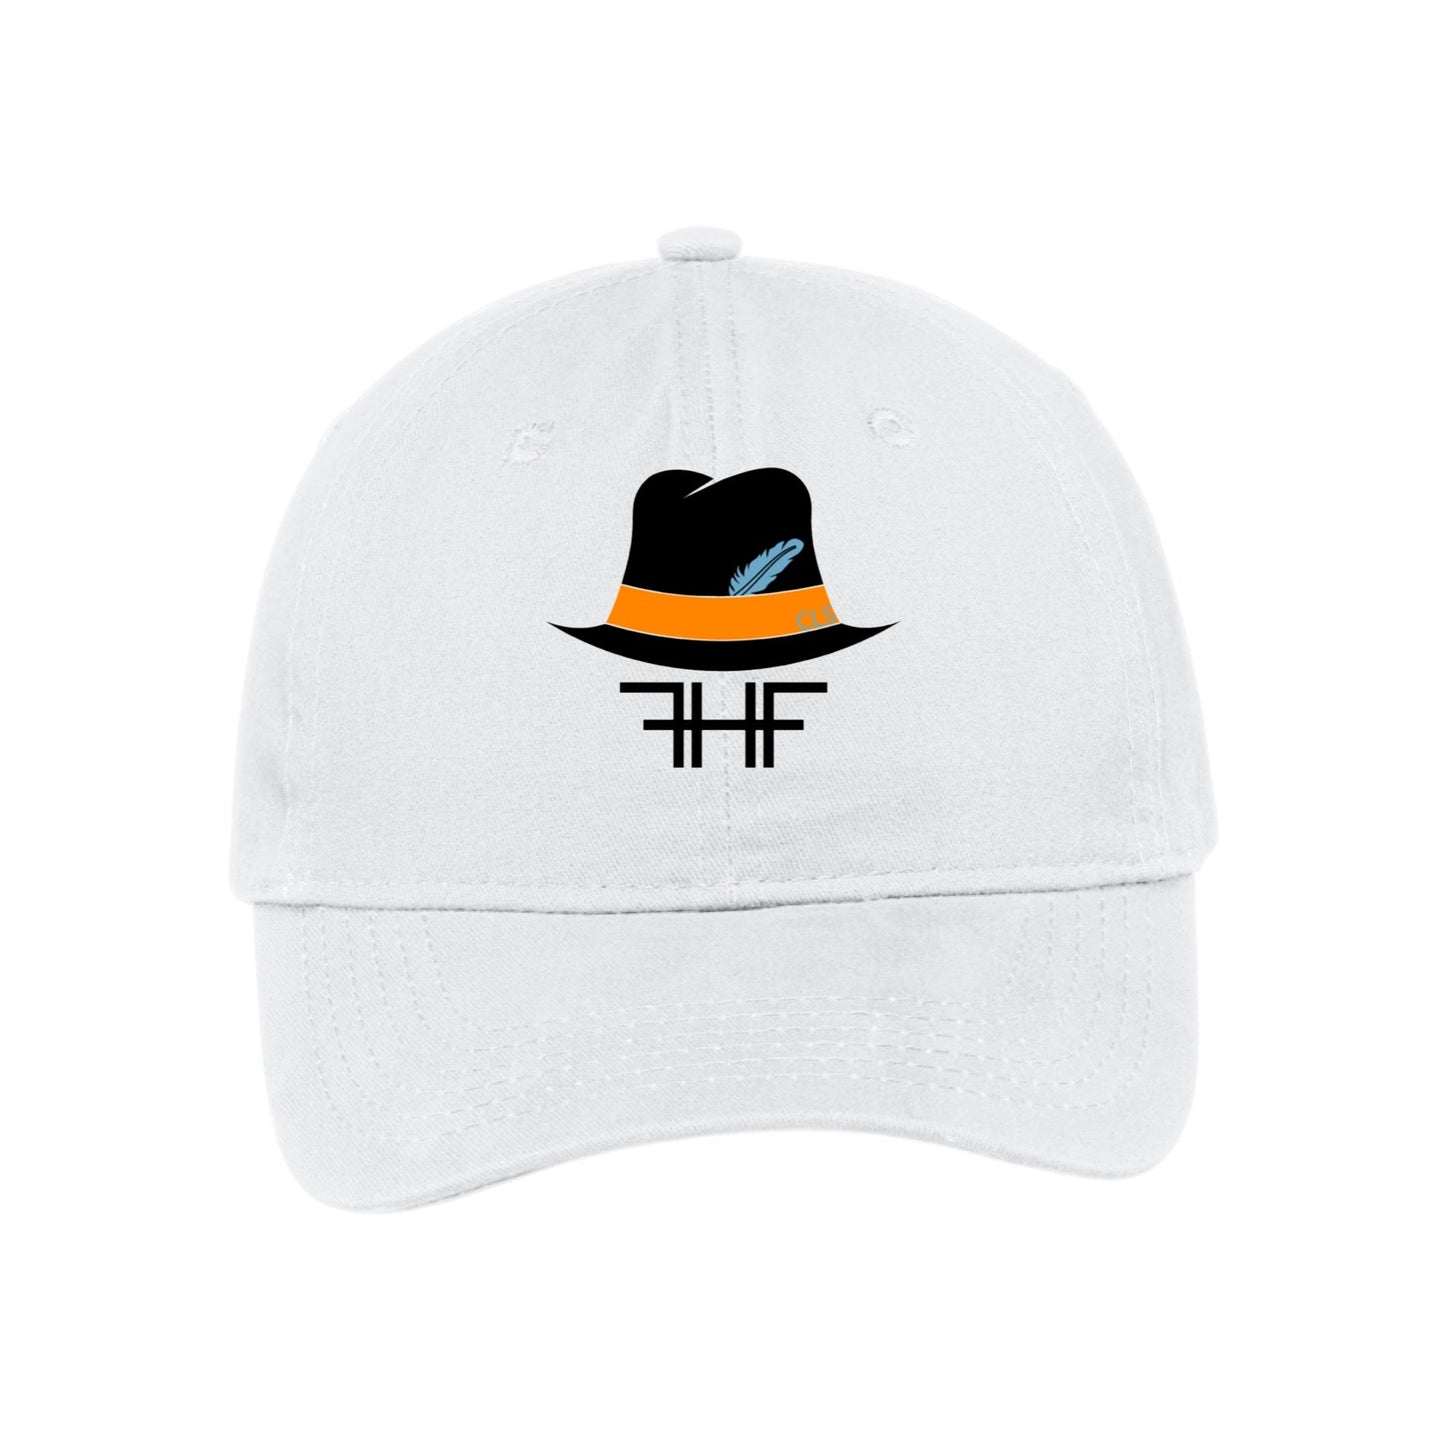 Equestrian Team Apparel White Fetching hat Farm Baseball caps equestrian team apparel online tack store mobile tack store custom farm apparel custom show stable clothing equestrian lifestyle horse show clothing riding clothes horses equestrian tack store